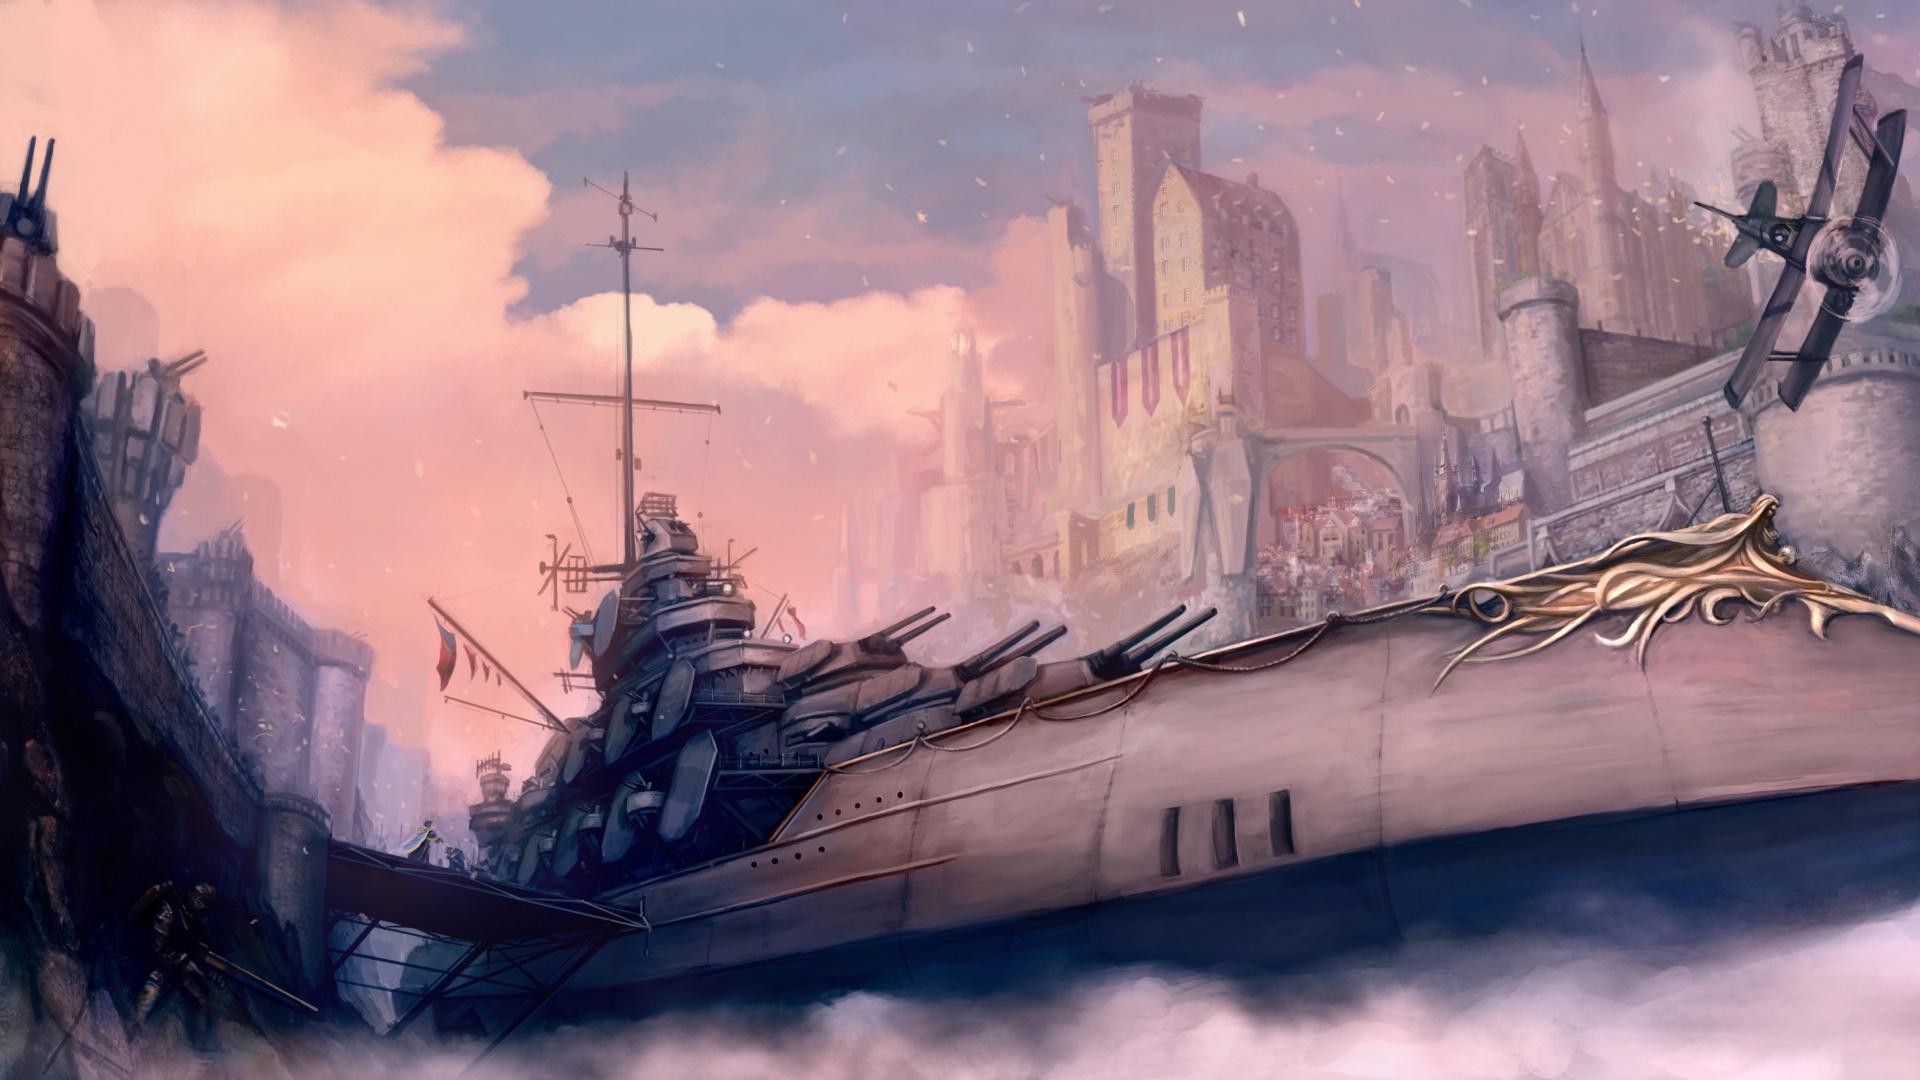 Steampunk, Ship, Airship, Painting, Watercolor Paint. Wallpaper in 1920x1080 Resolution